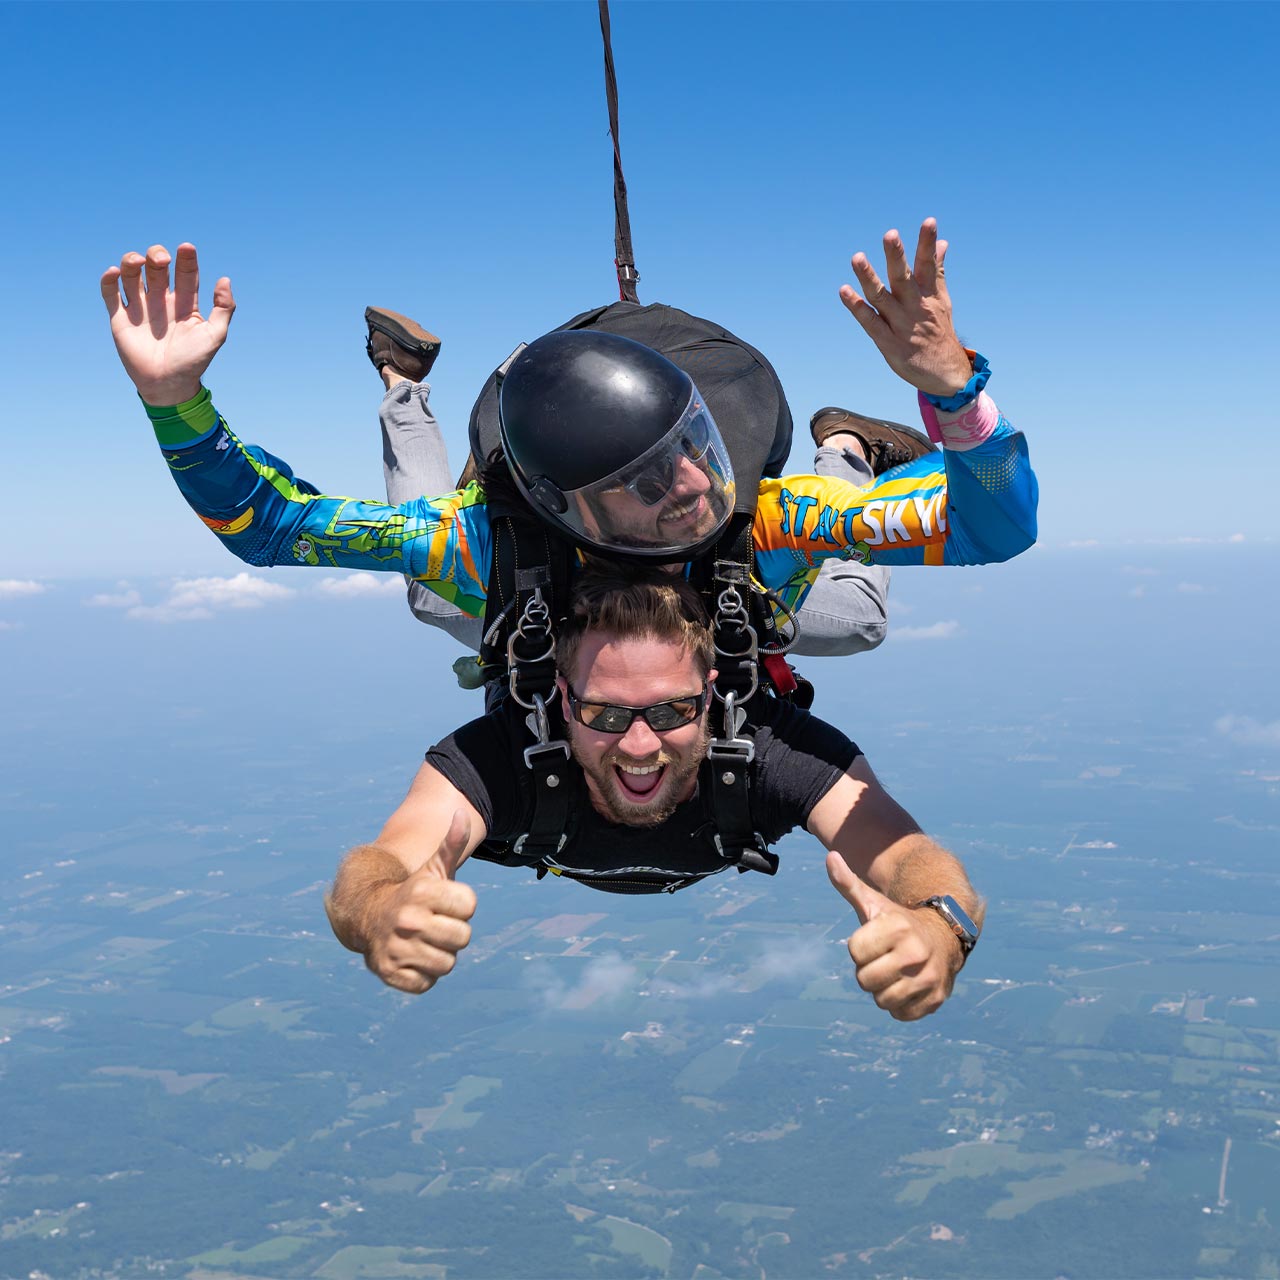 Male tandem skydiving pair giving thumbs ups and smiles during freefall.